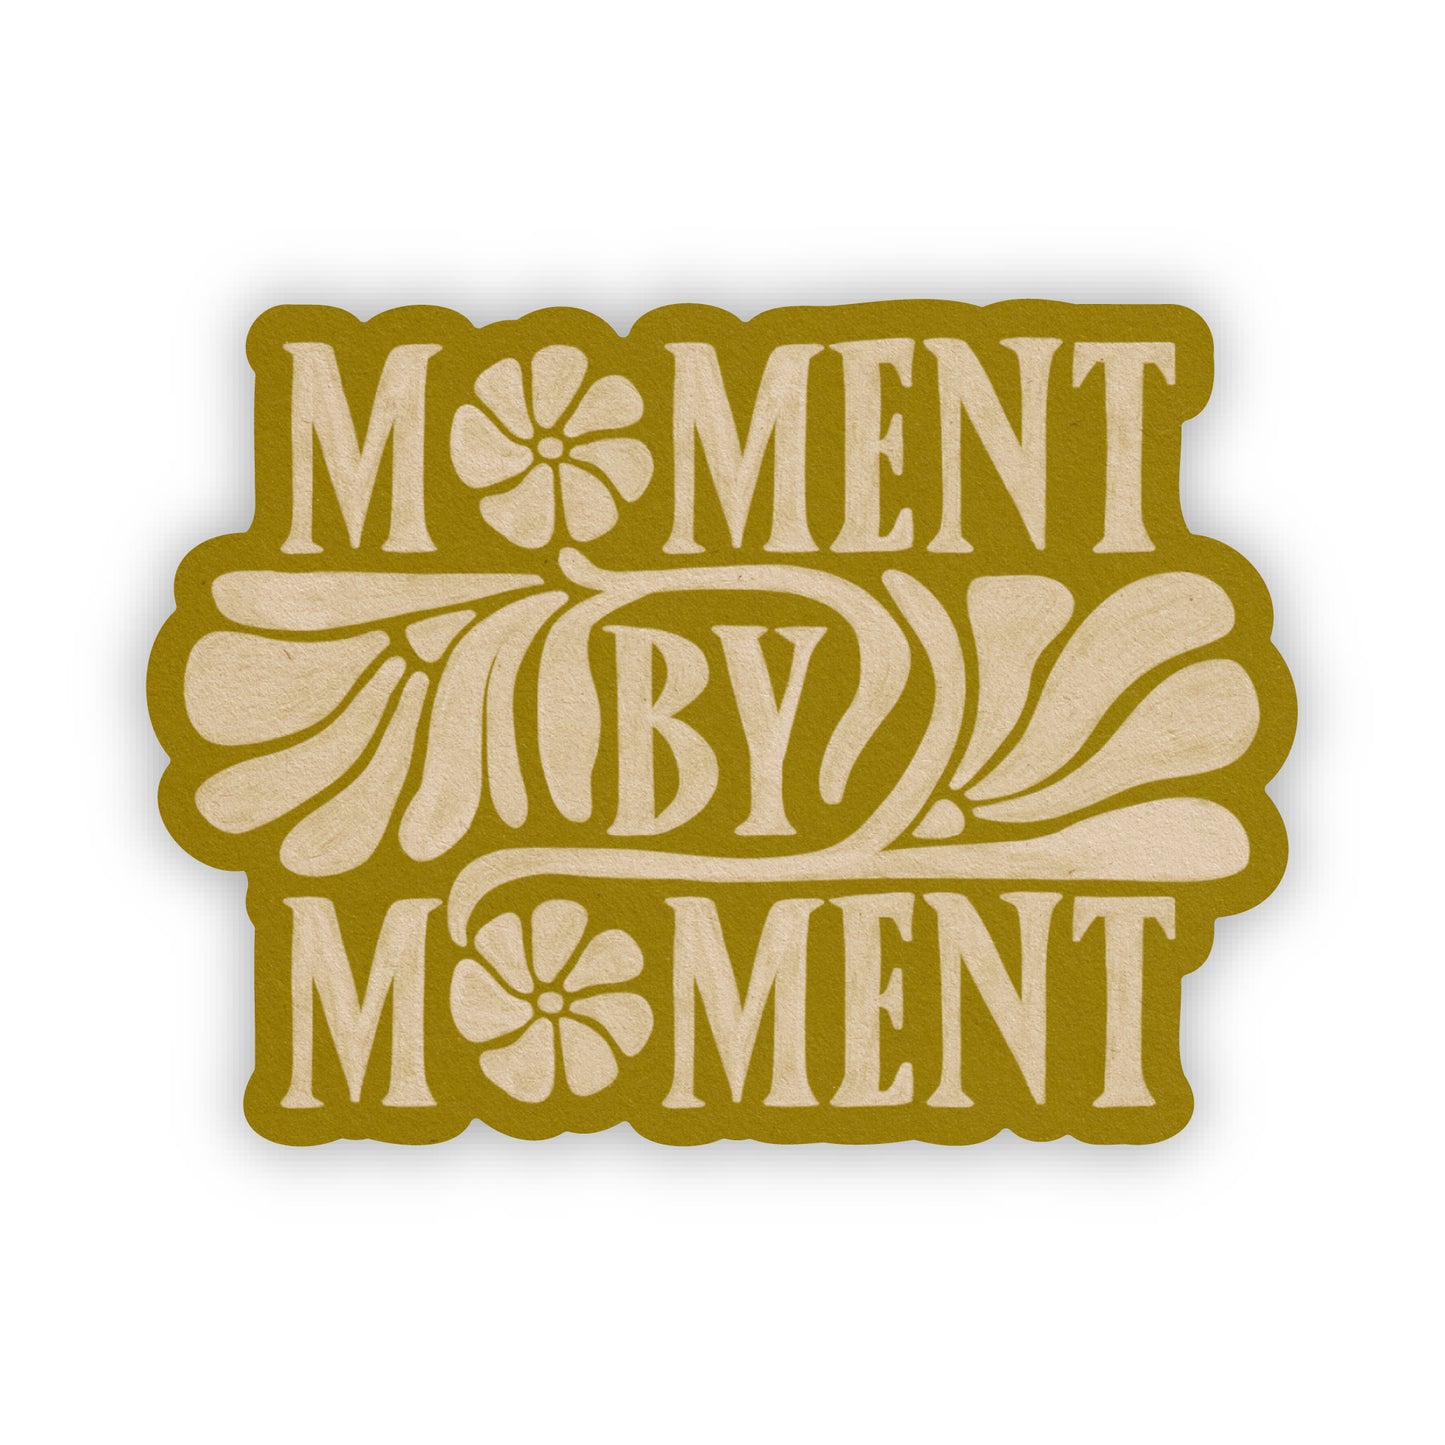 Moment By Moment - Vinyl Sticker